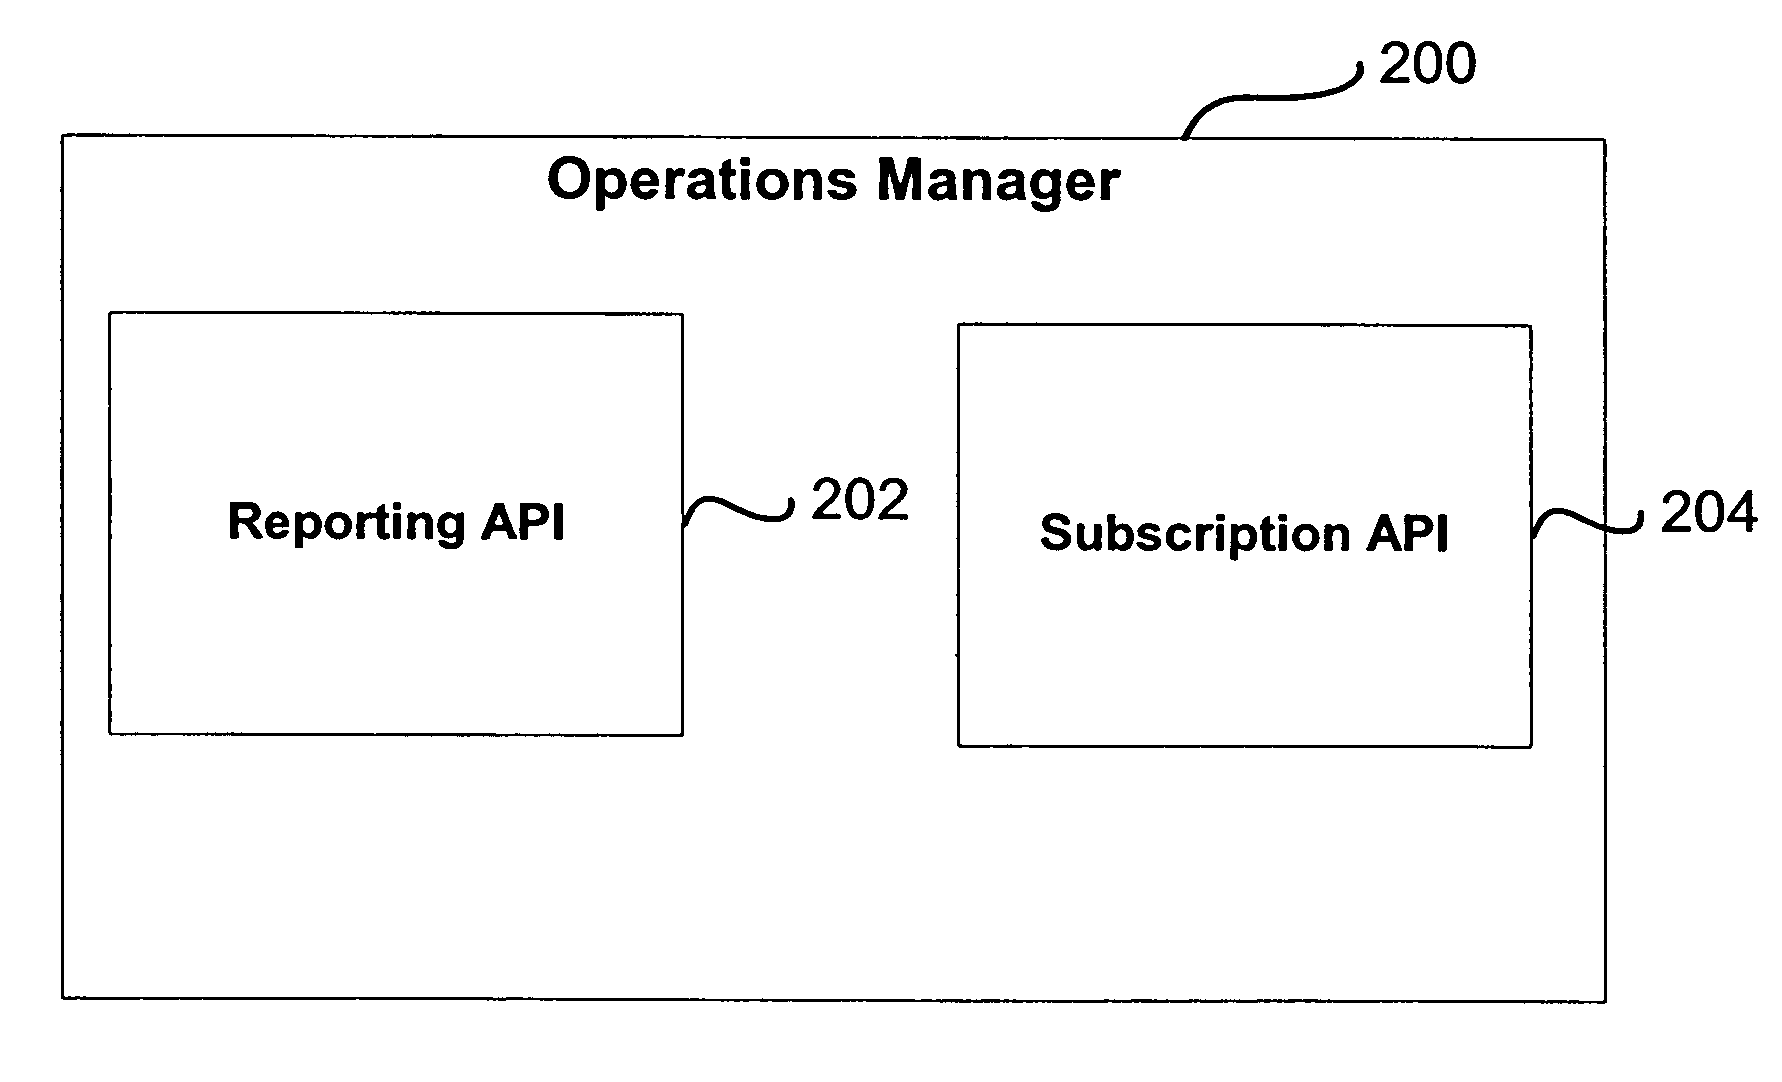 Operations manager infrastructure for dynamically updating software operational policy